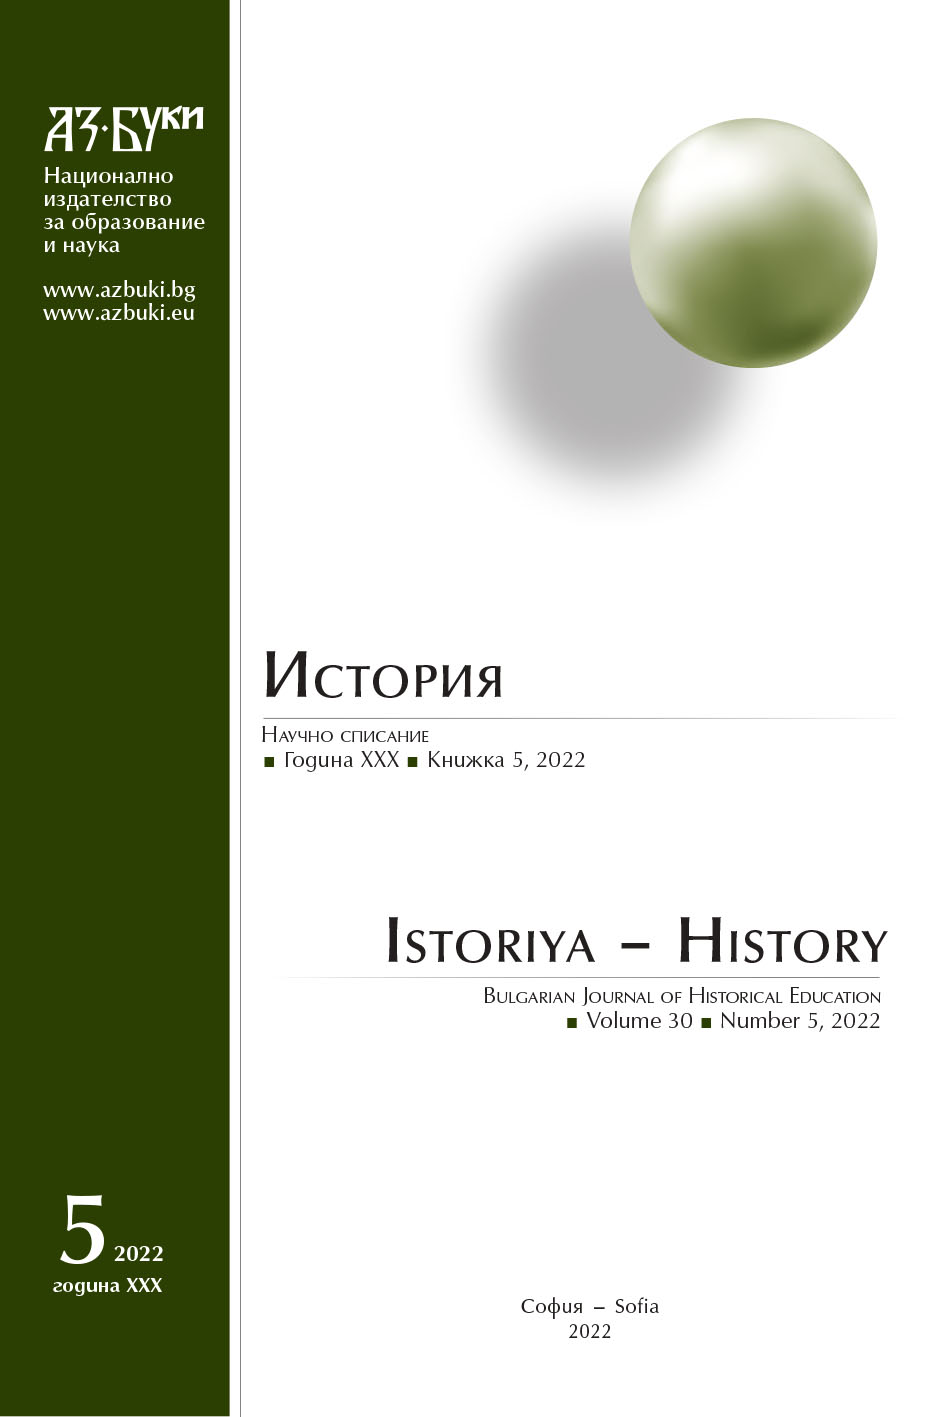 A Monograph on the Centurial History of the Bulgarian Youth Red Cross Cover Image